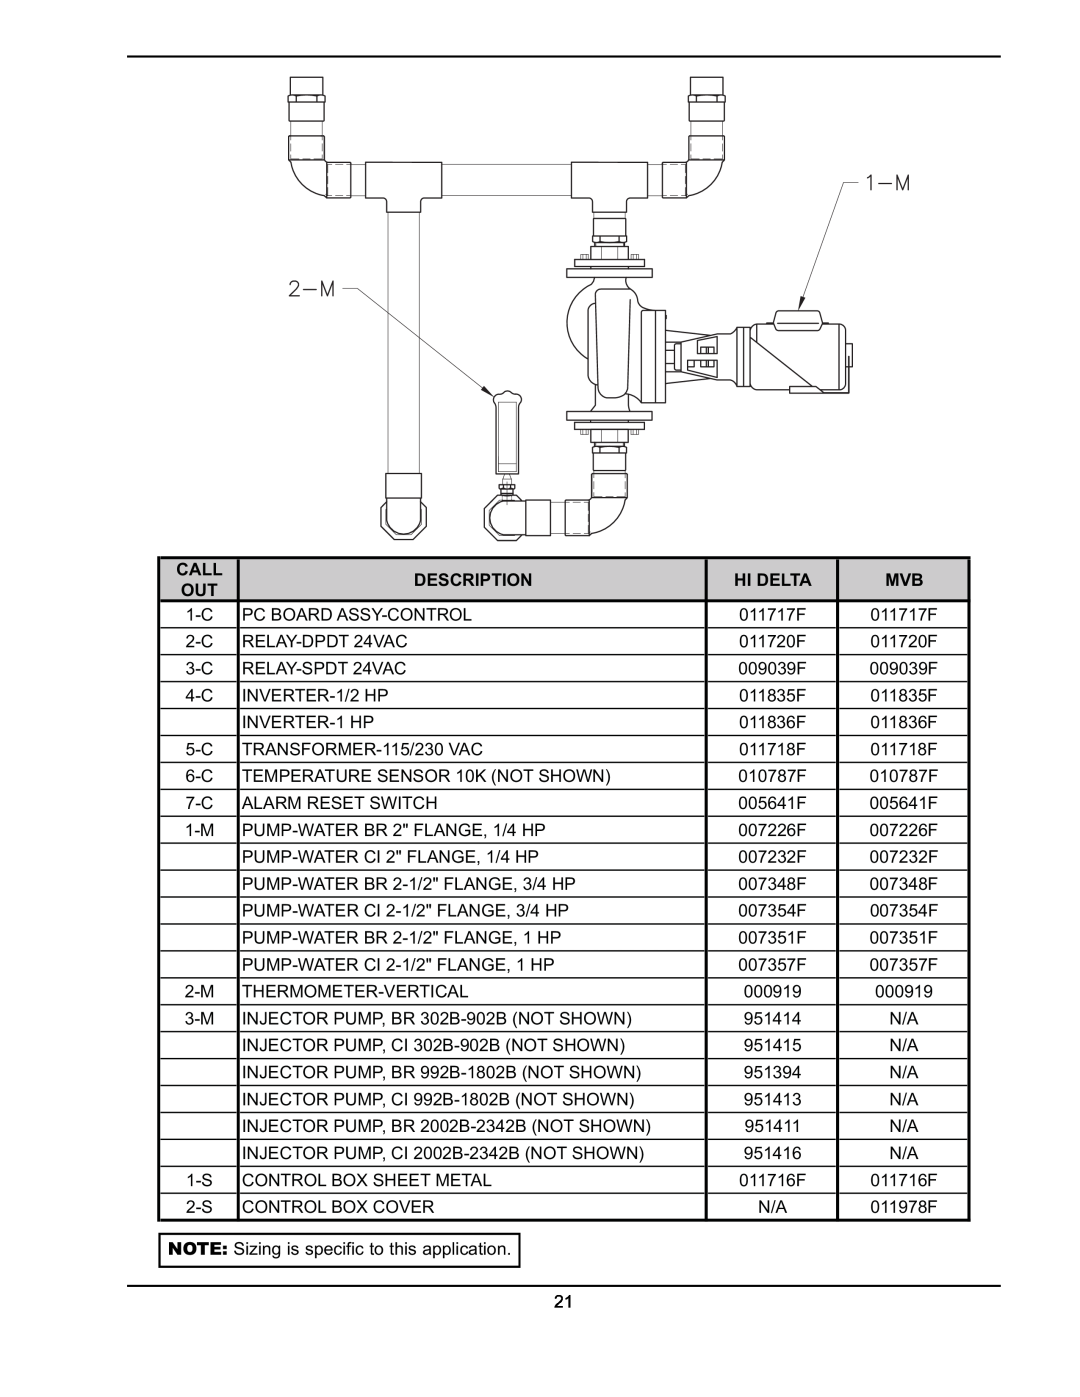 Raypak 241275 manual Call, Description, Hi Delta, NOTE Sizing is specific to this application 